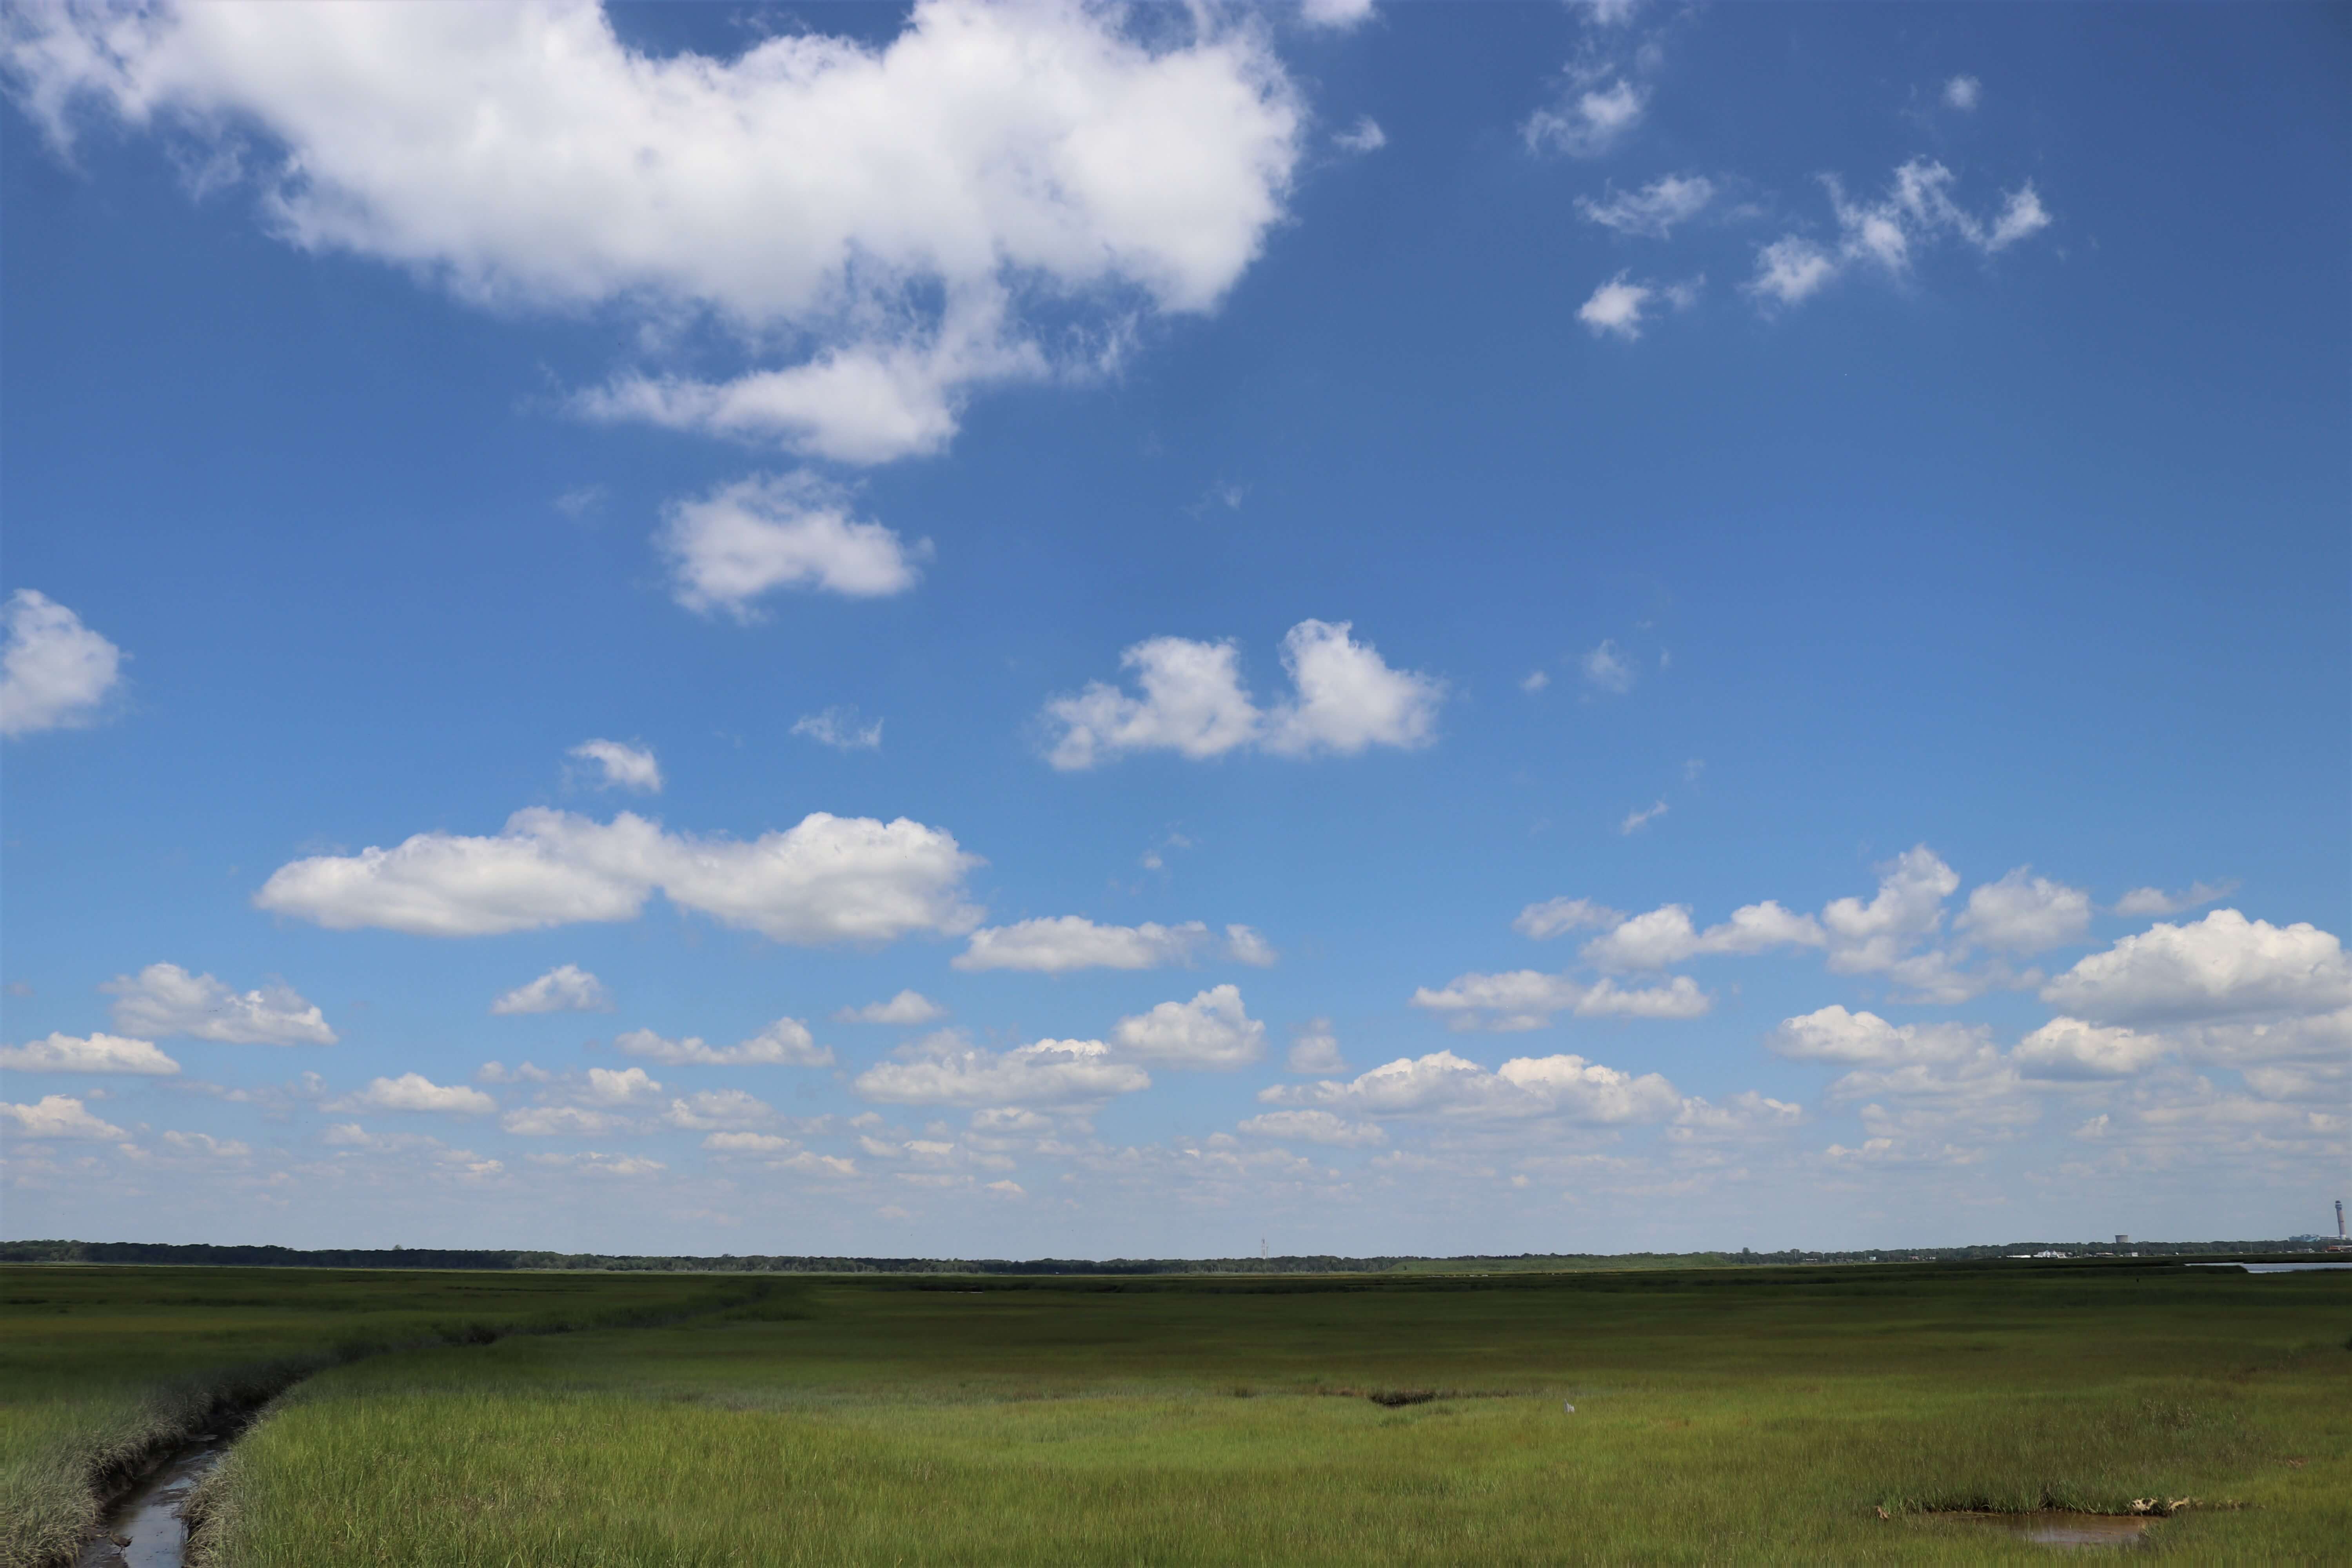 Summer clouds gather over an expanse of marsh in Ocean City. Environmental advocates say half of American wetlands could be vulnerable under changes to federal clean water rules that recently took effect. Proponents say the changes bring long-needed clarity.